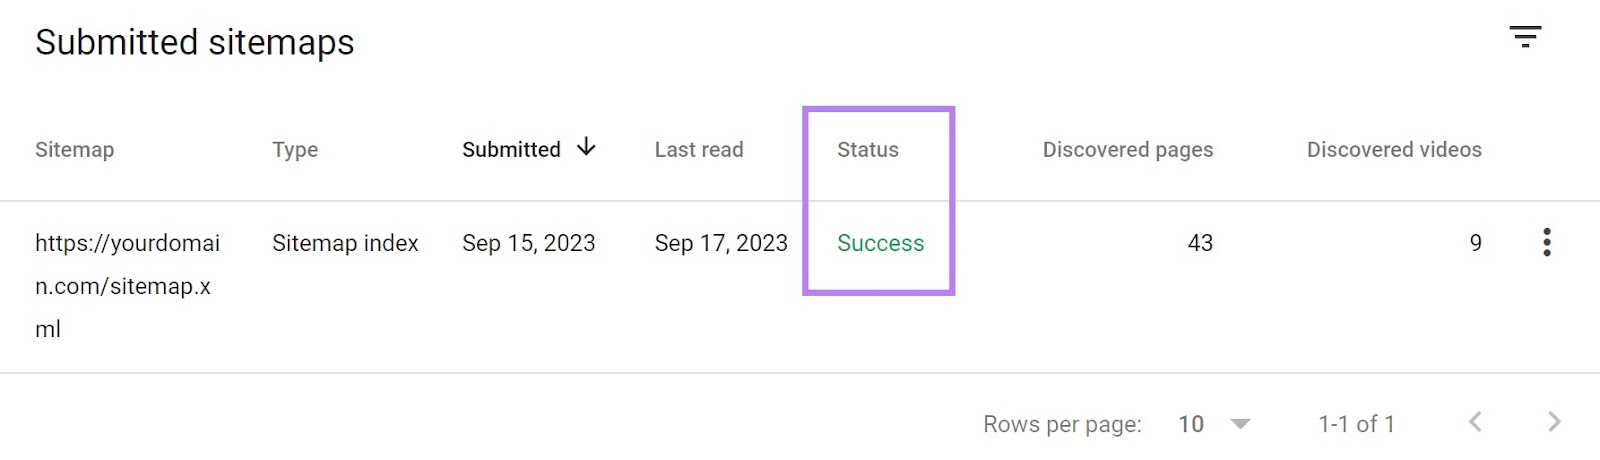 “Success” notice in the “Status” column under “Submitted sitemaps” section